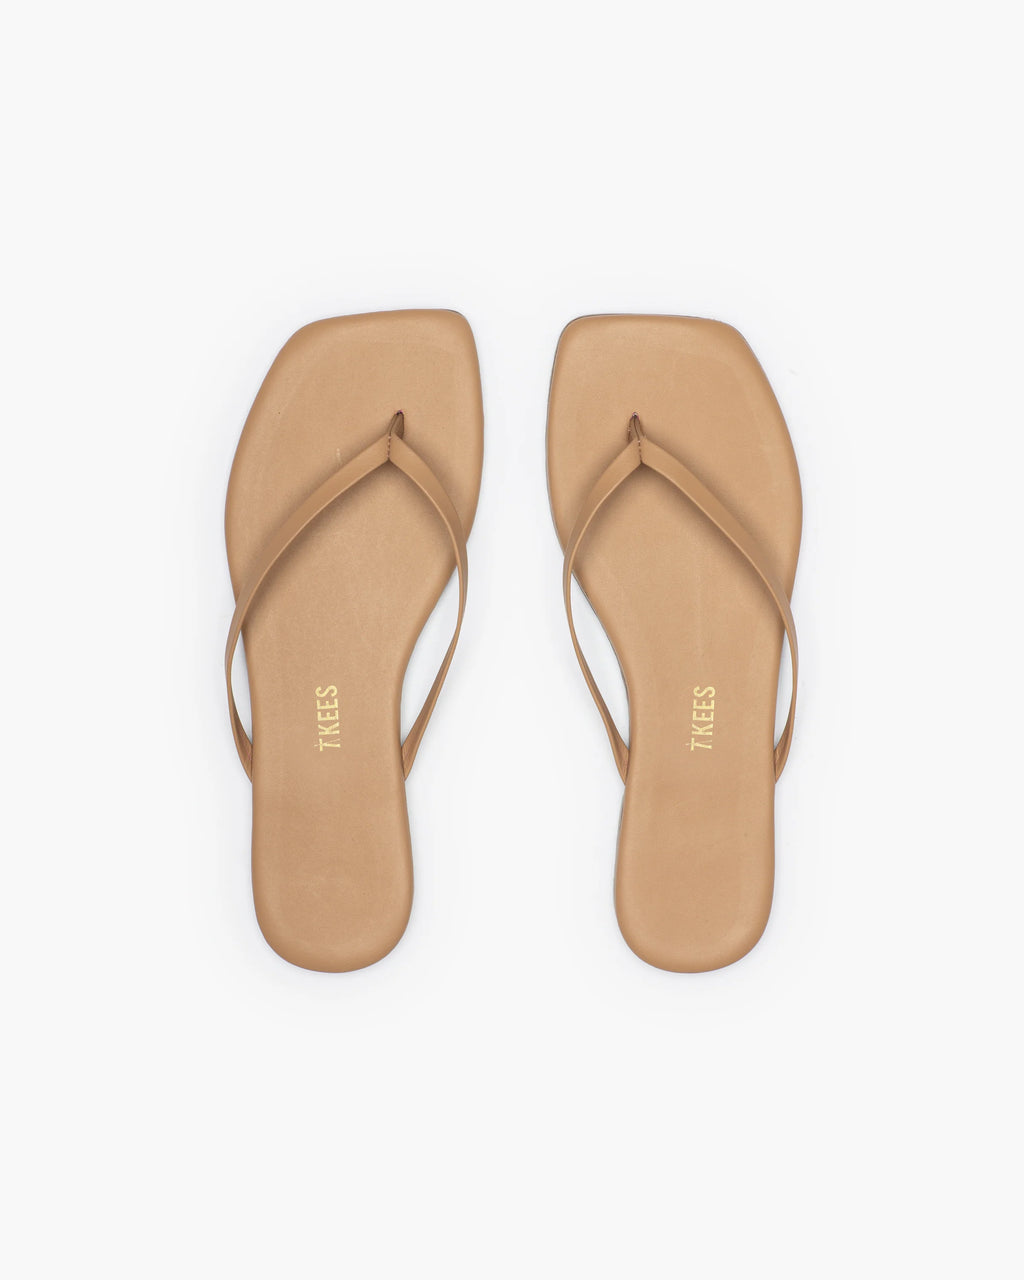 Tkees Square Toe Lily Flip Flop in Cocobutter, featuring minimalist design and modern elegance.